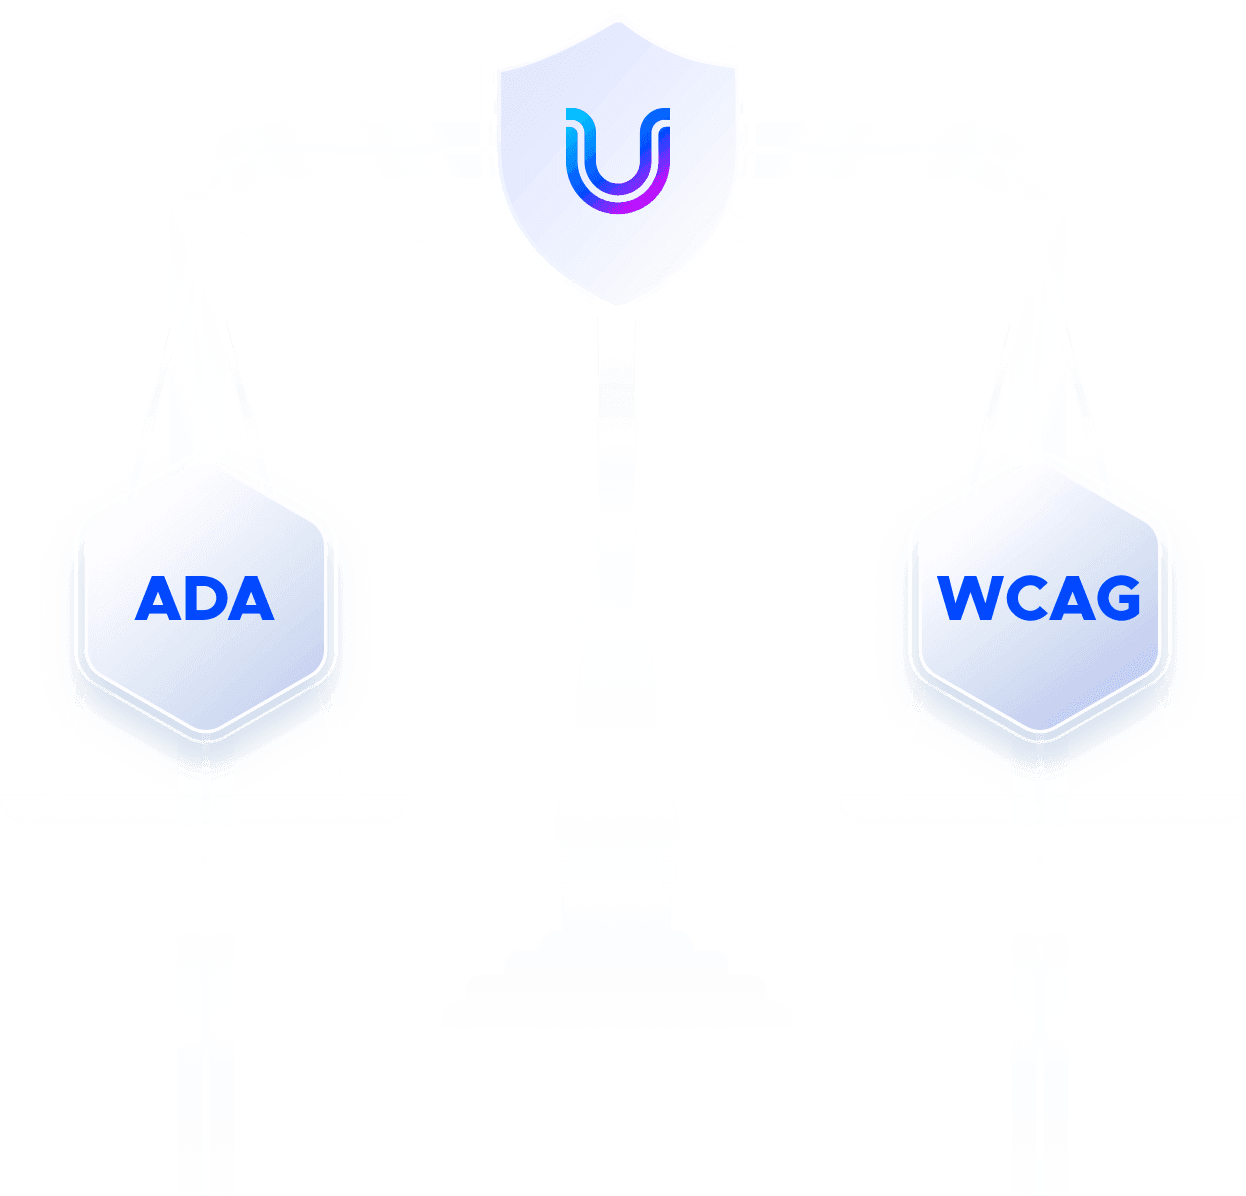 Scales of justice, with the captions ADA and WCAG on either side and the UserWay logo at the apex